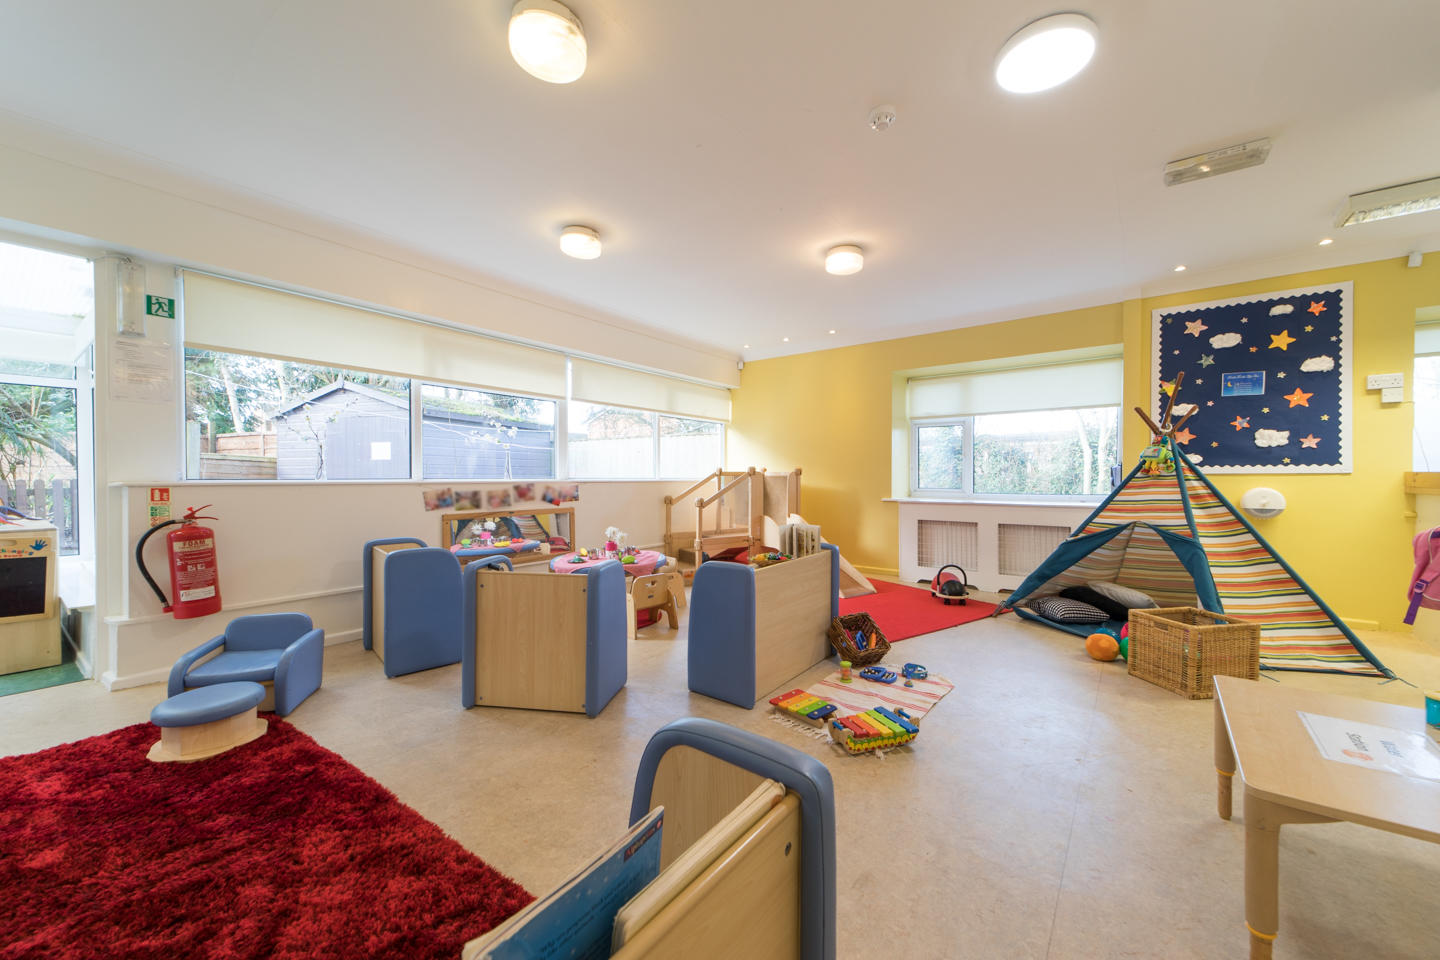 Images Bright Horizons Clairmont Day Nursery and Preschool